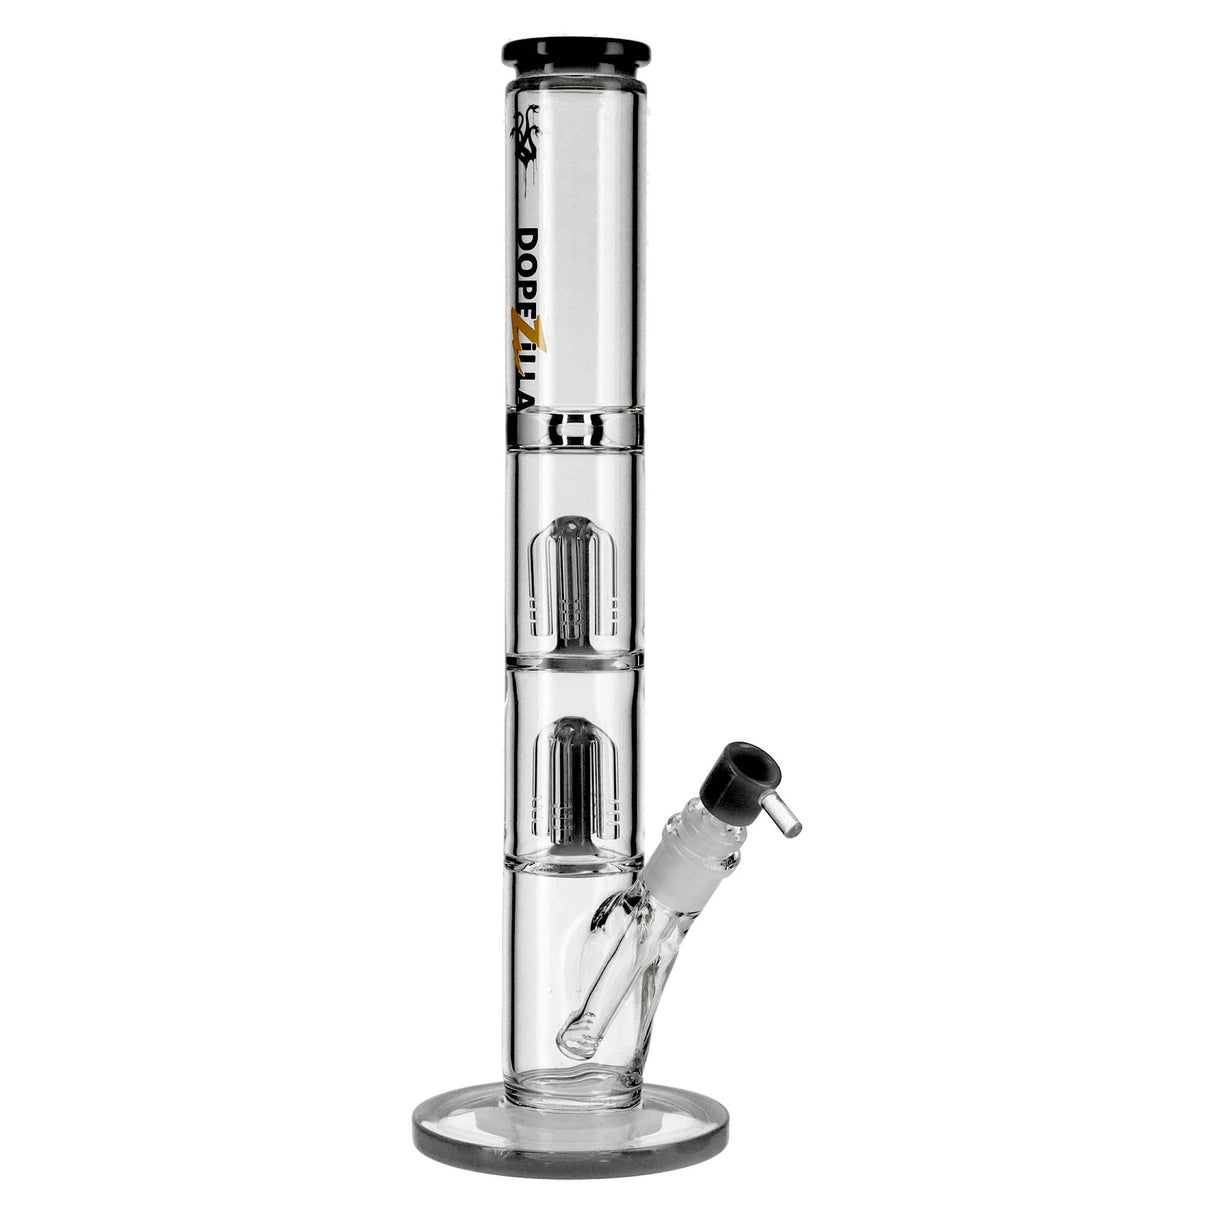 Dopezilla Hydra straight water pipe, clear borosilicate glass with black accents, side view